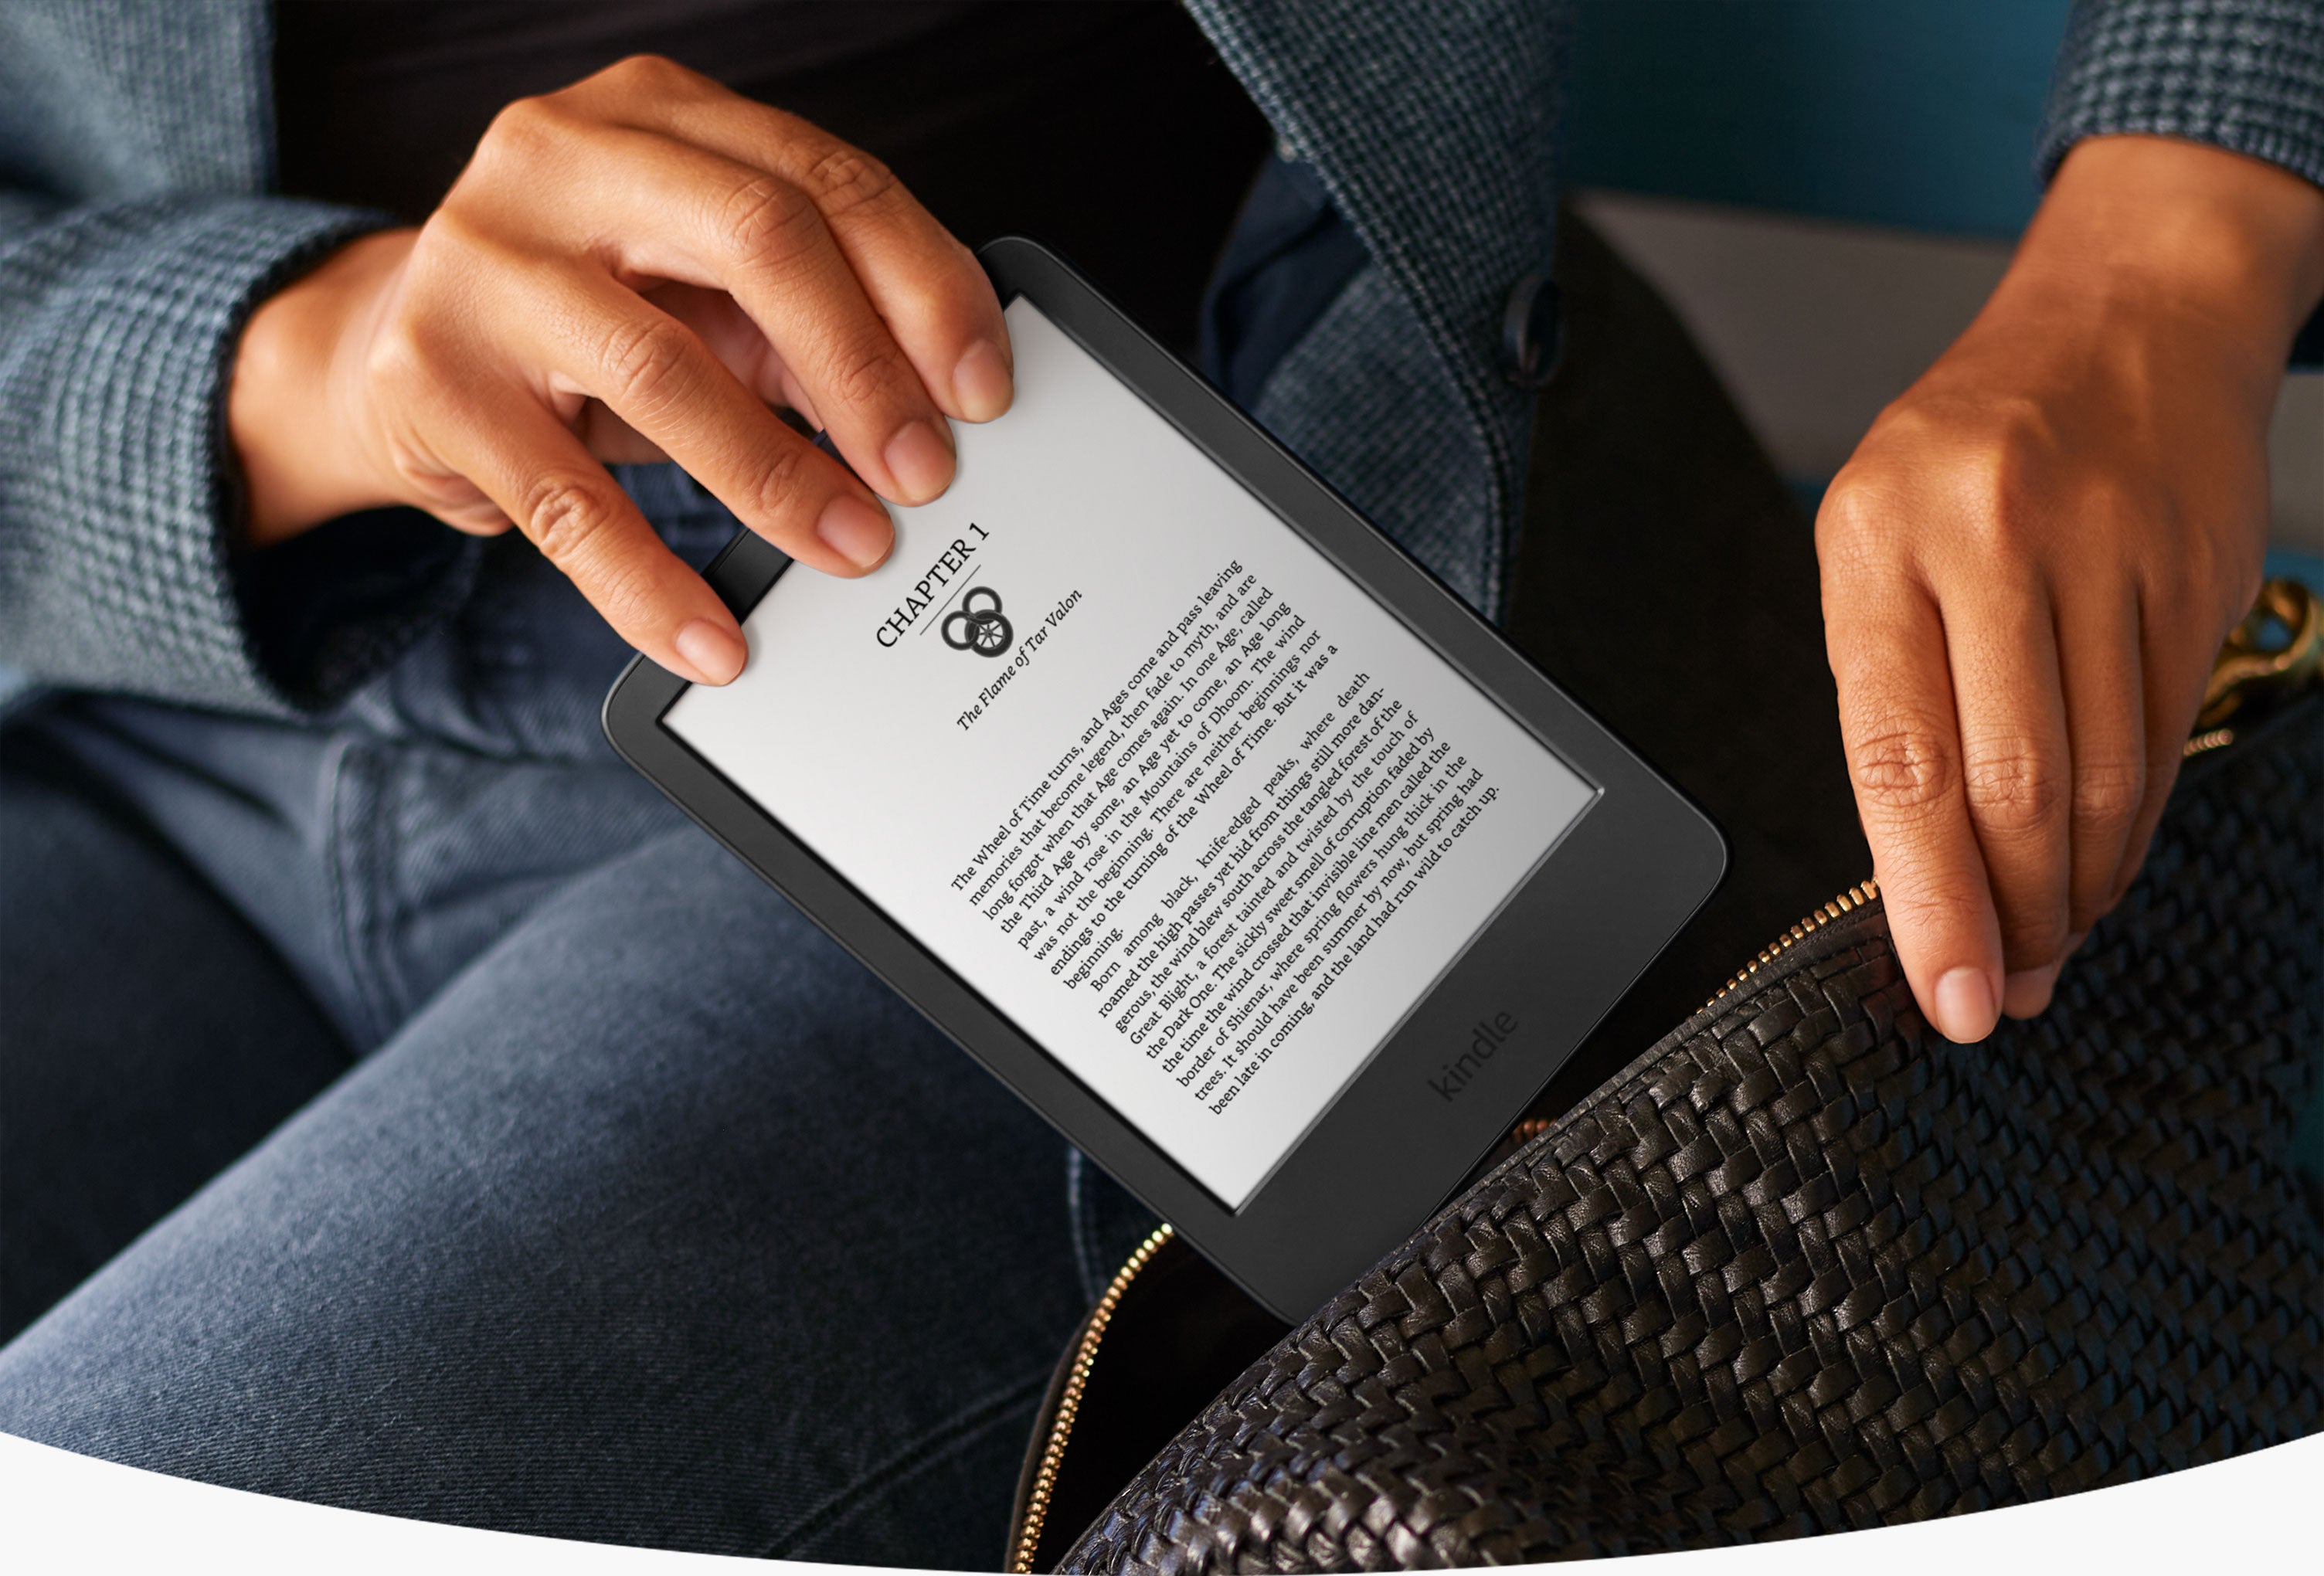  International Version – Kindle Oasis – Now with adjustable warm  light - 8 GB, Graphite : Electronics